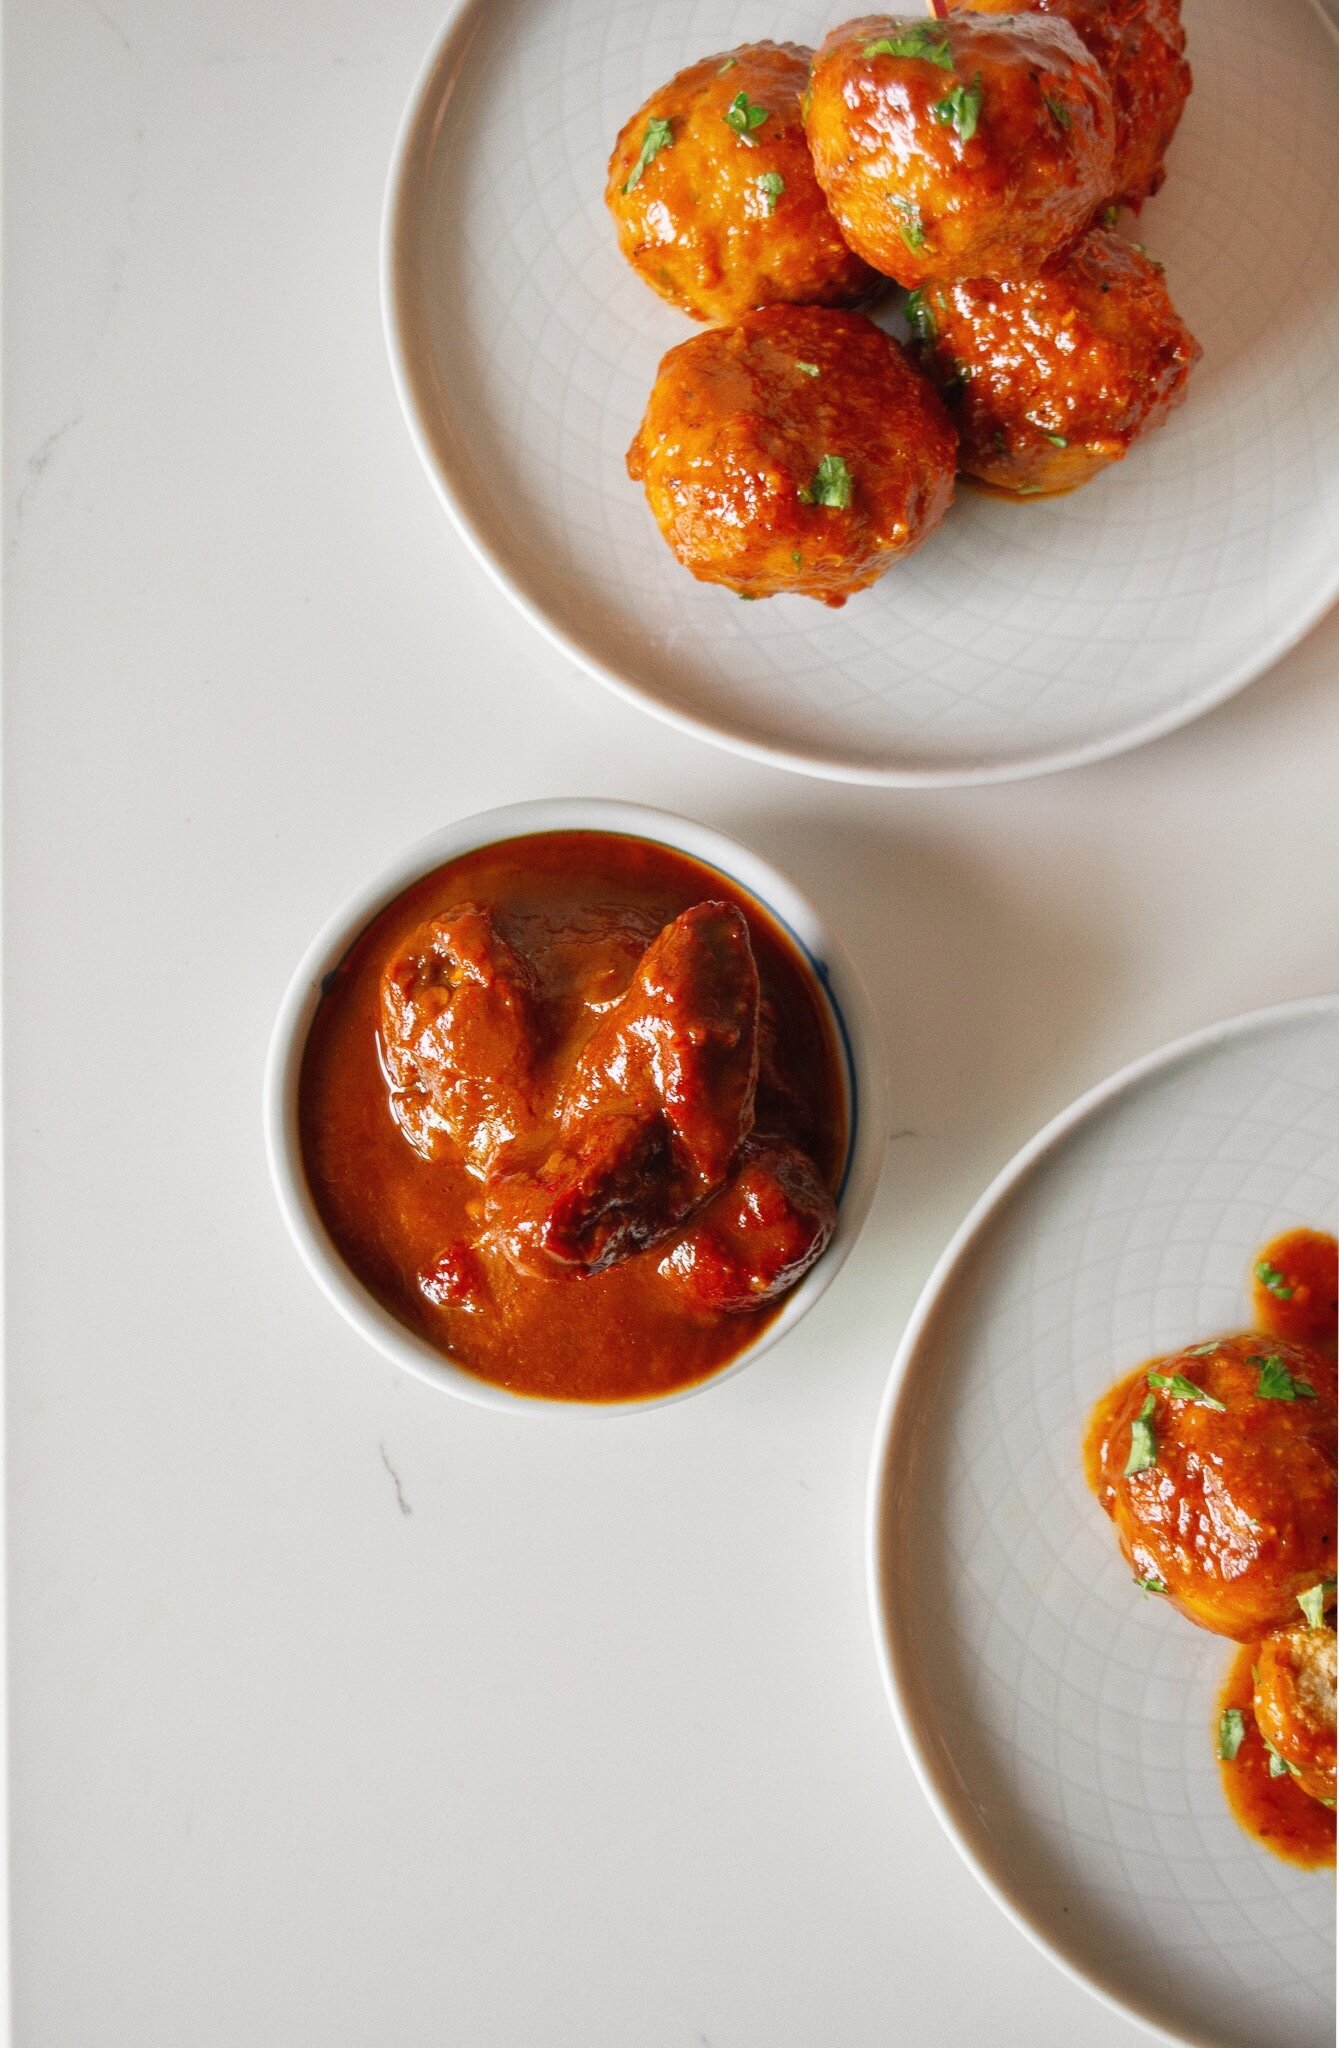 Juicy Oven-Baked Honey Chipotle Chicken Meatballs with sauce